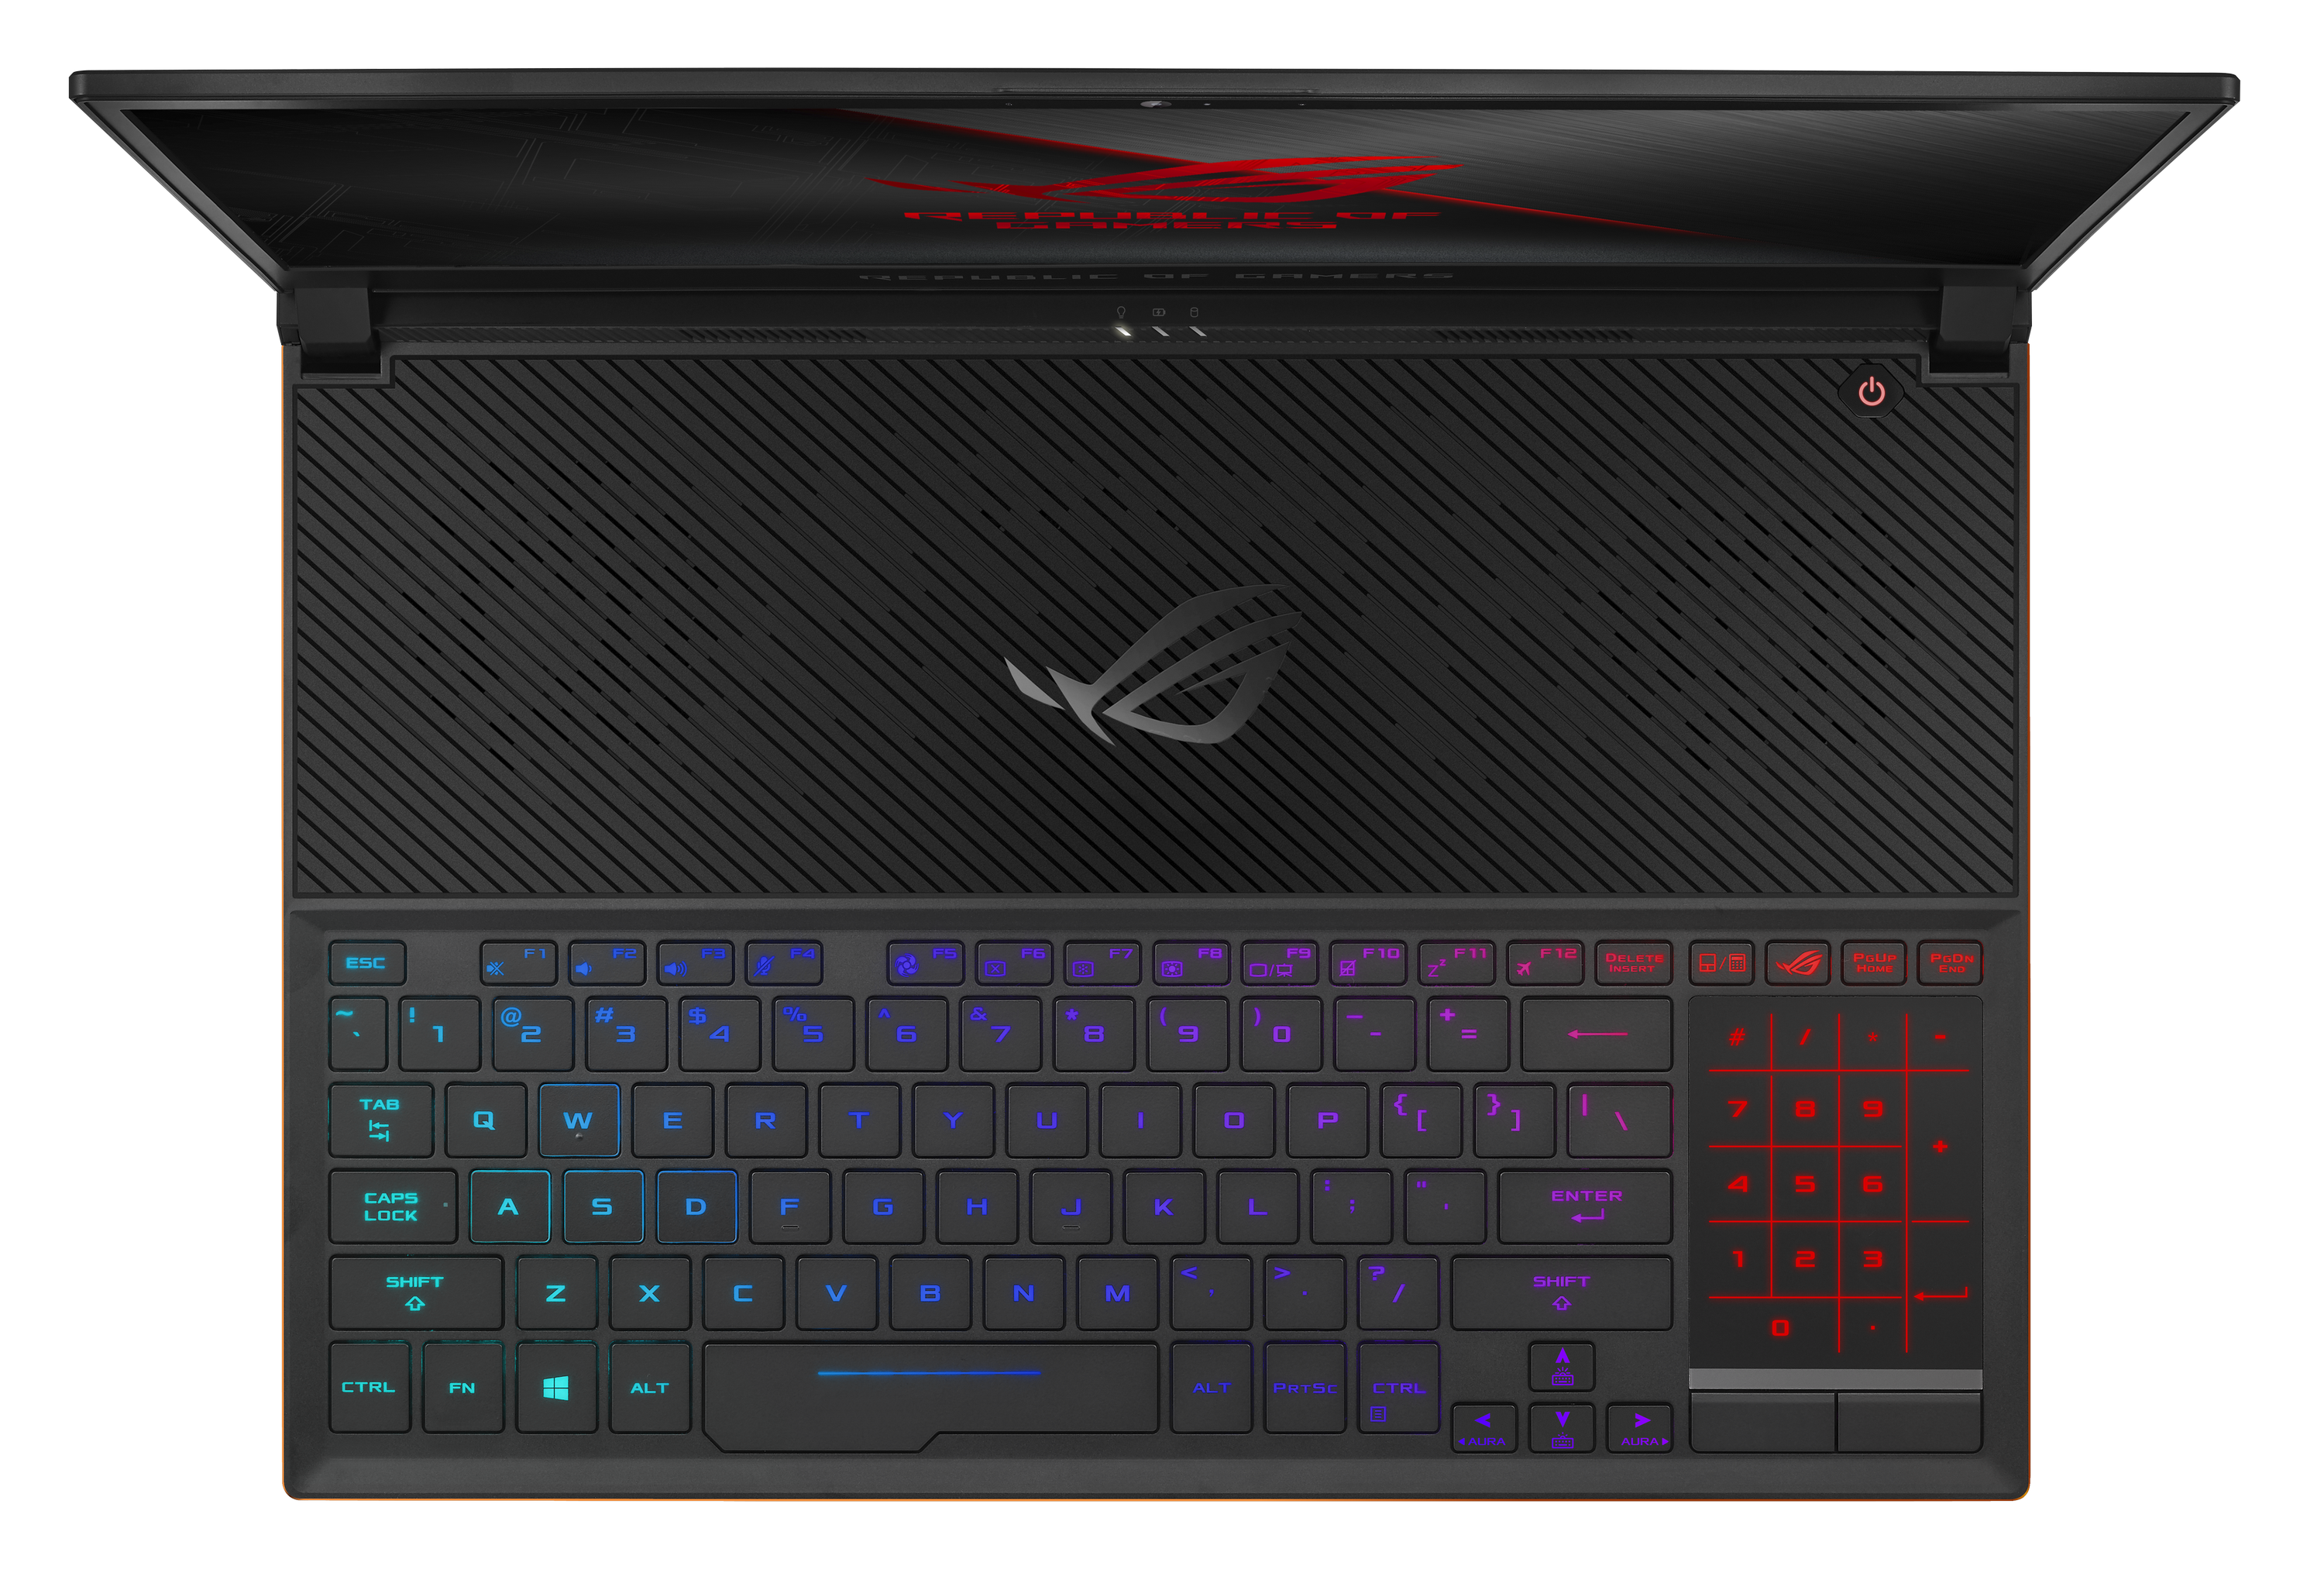 Asus Announces The Rog Zephyrus S Slimmest Gaming Laptop Available